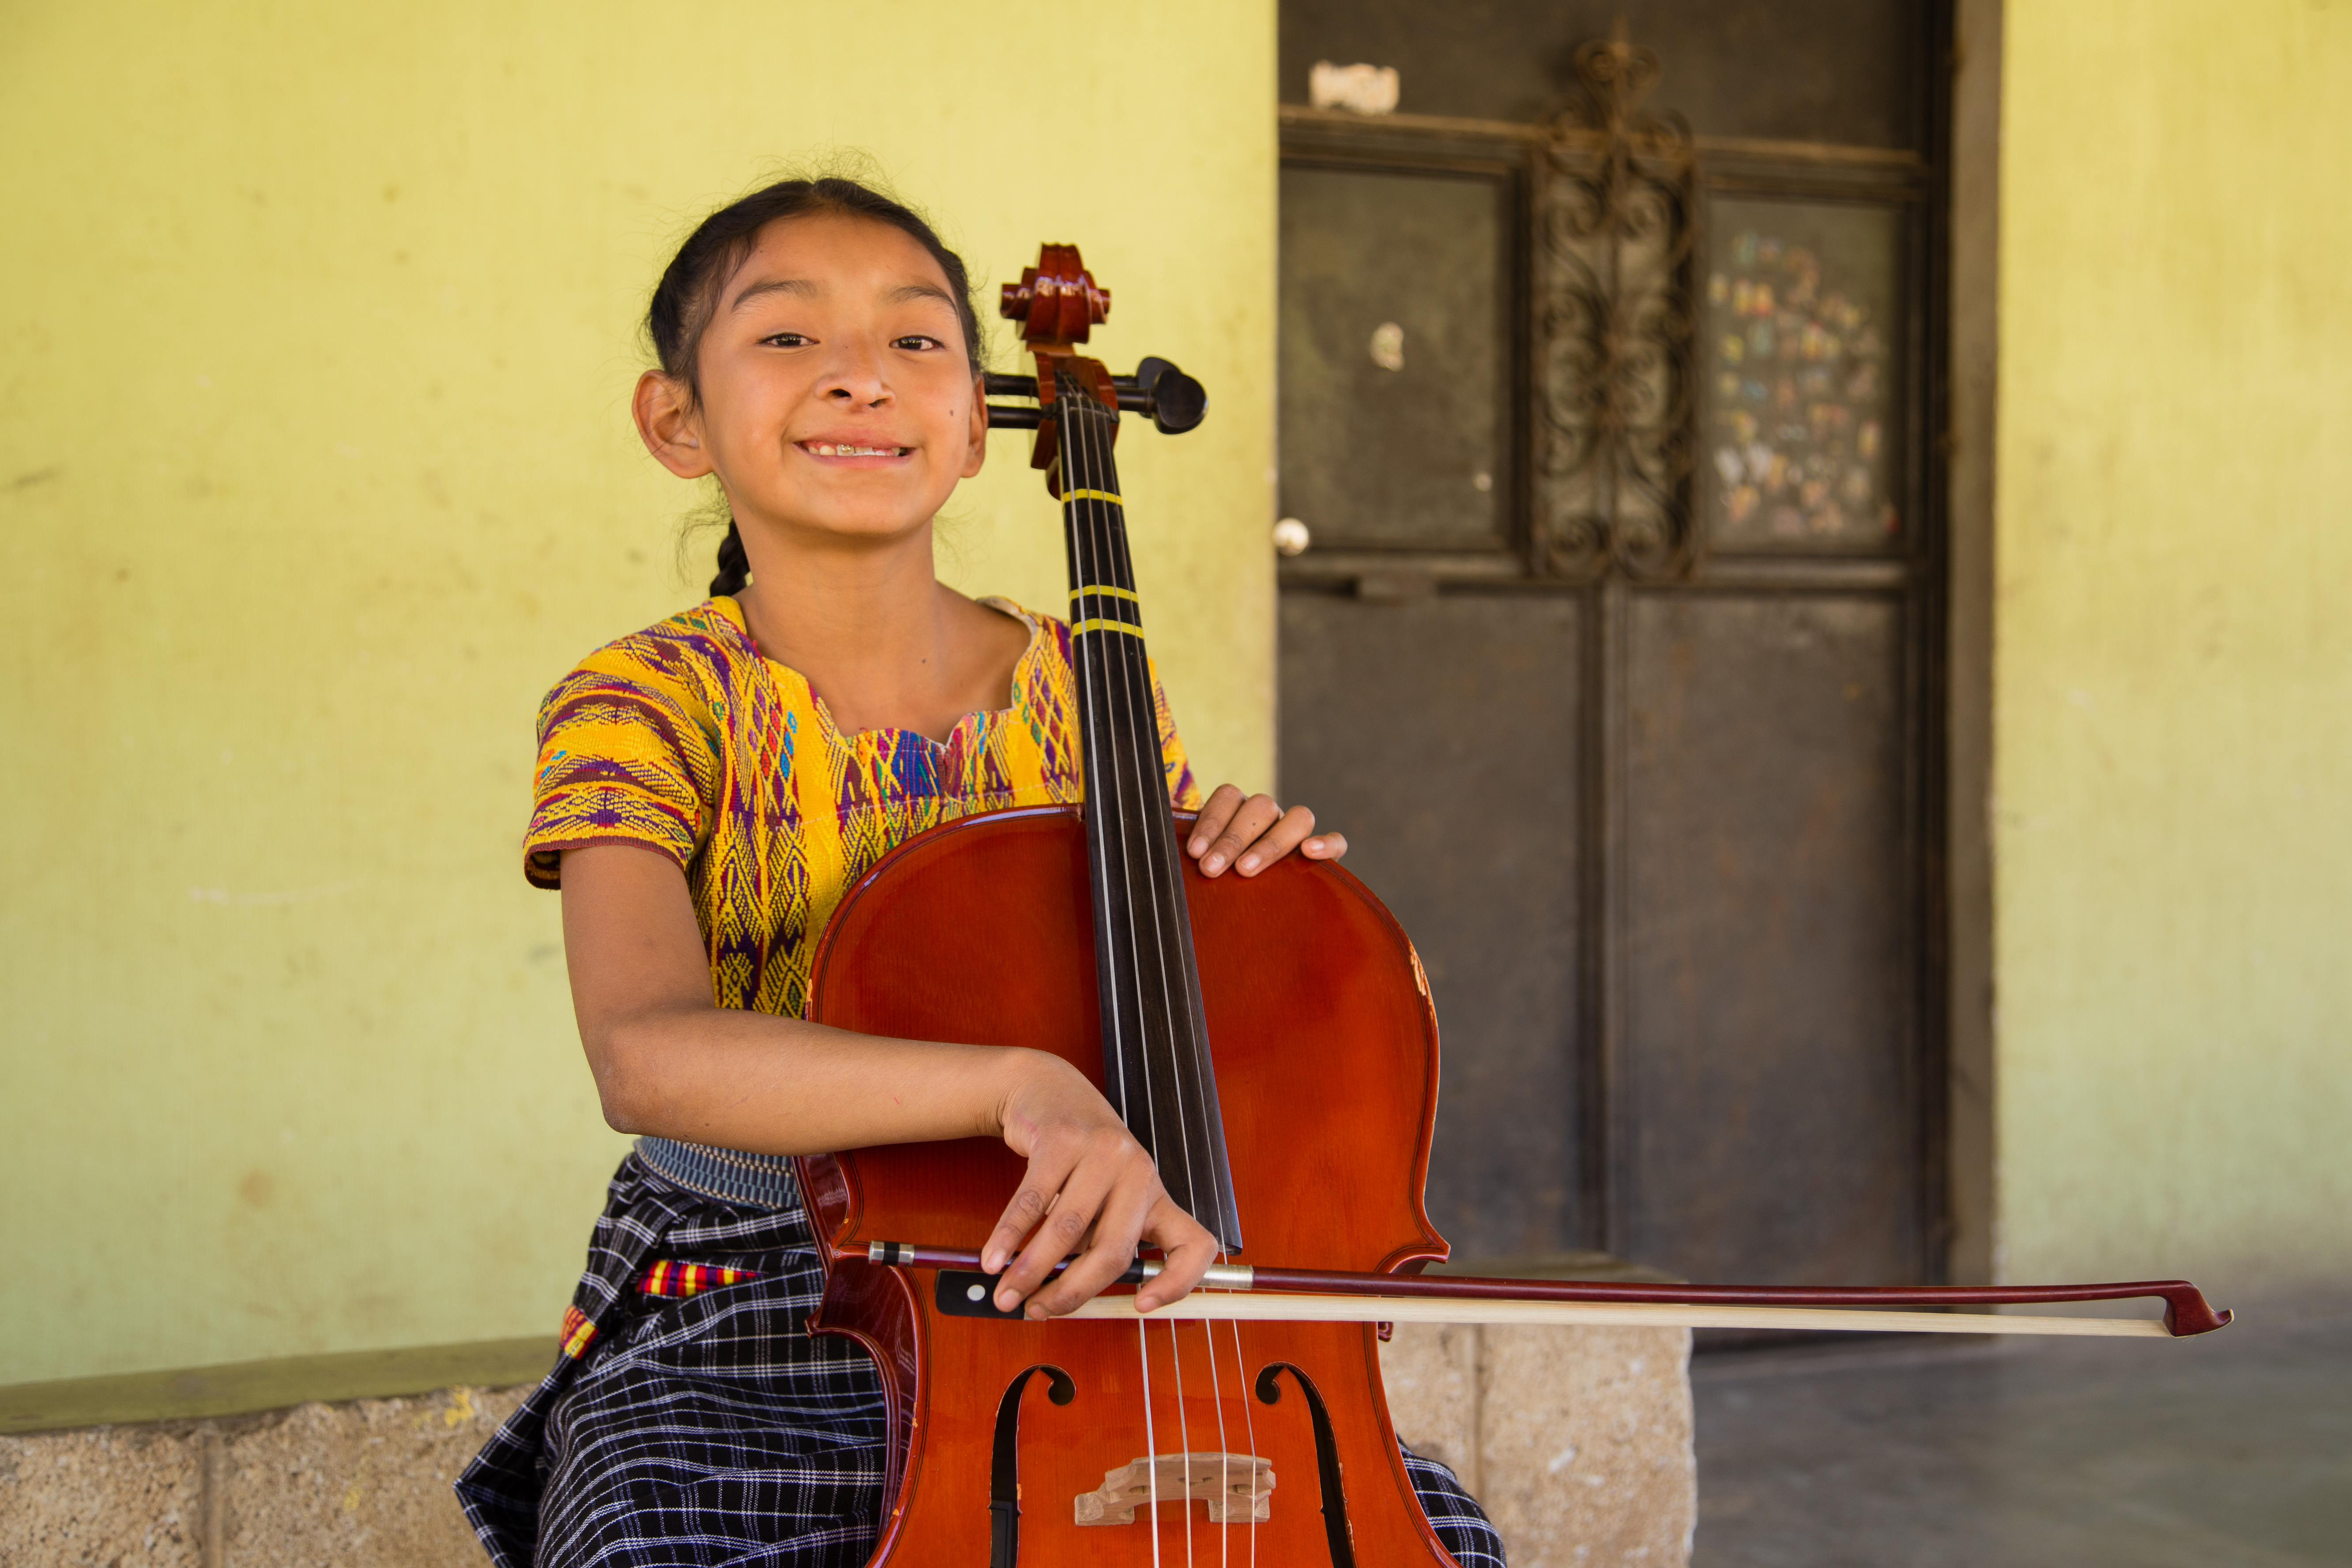 Valery smiling and playing the cello after cleft surgery